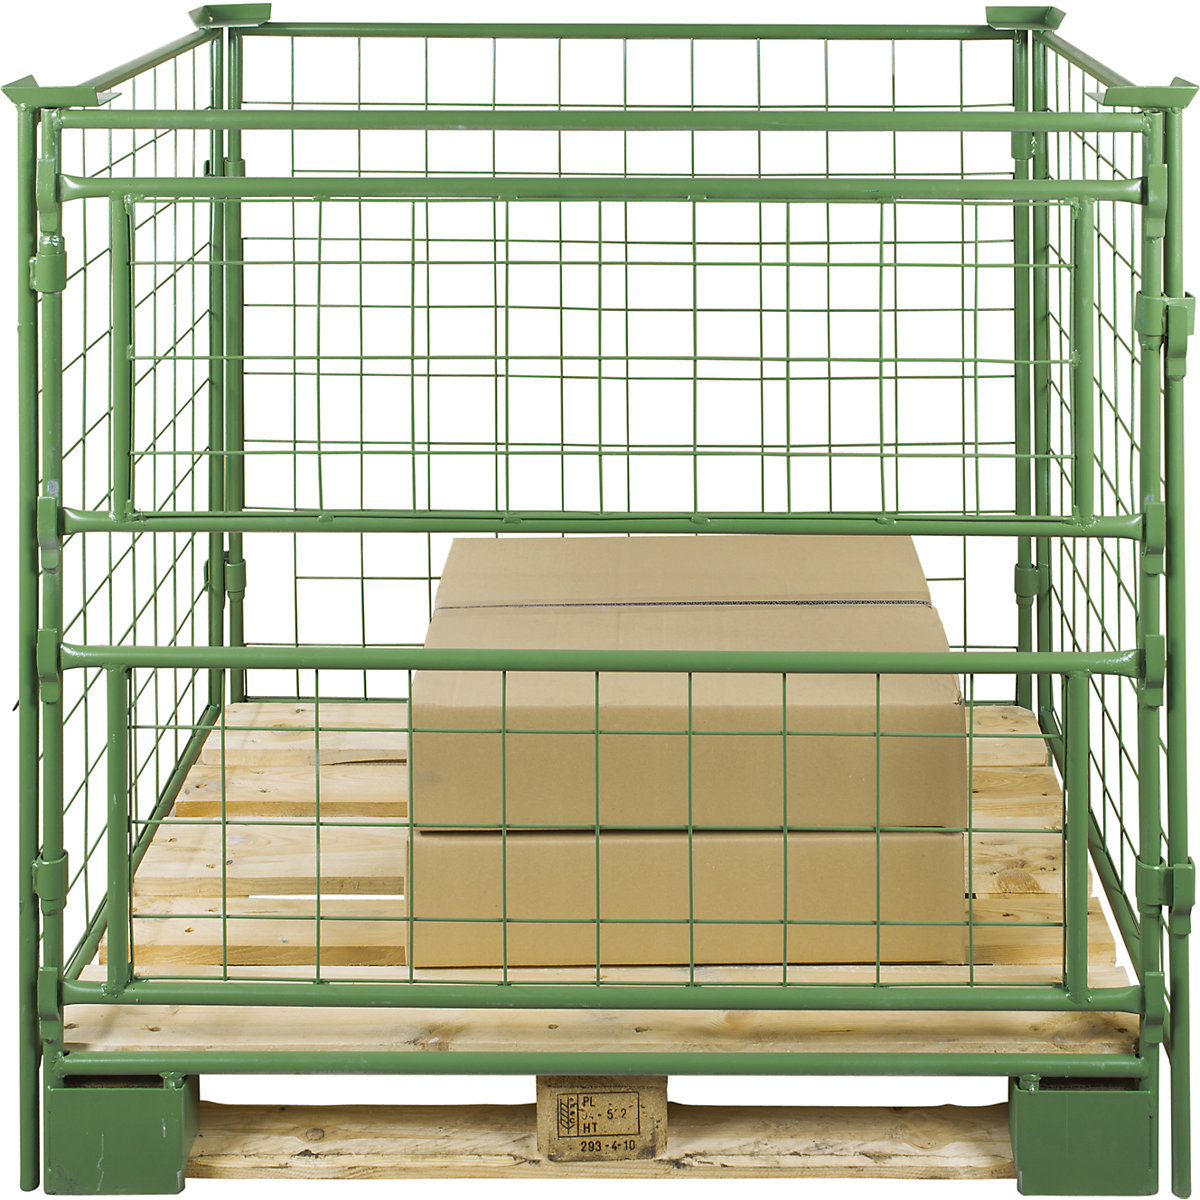 Pallet frame, effective height 800 mm, for attaching, WxL 800 x 1200 mm, 1 long side with 2 parts, removable-1